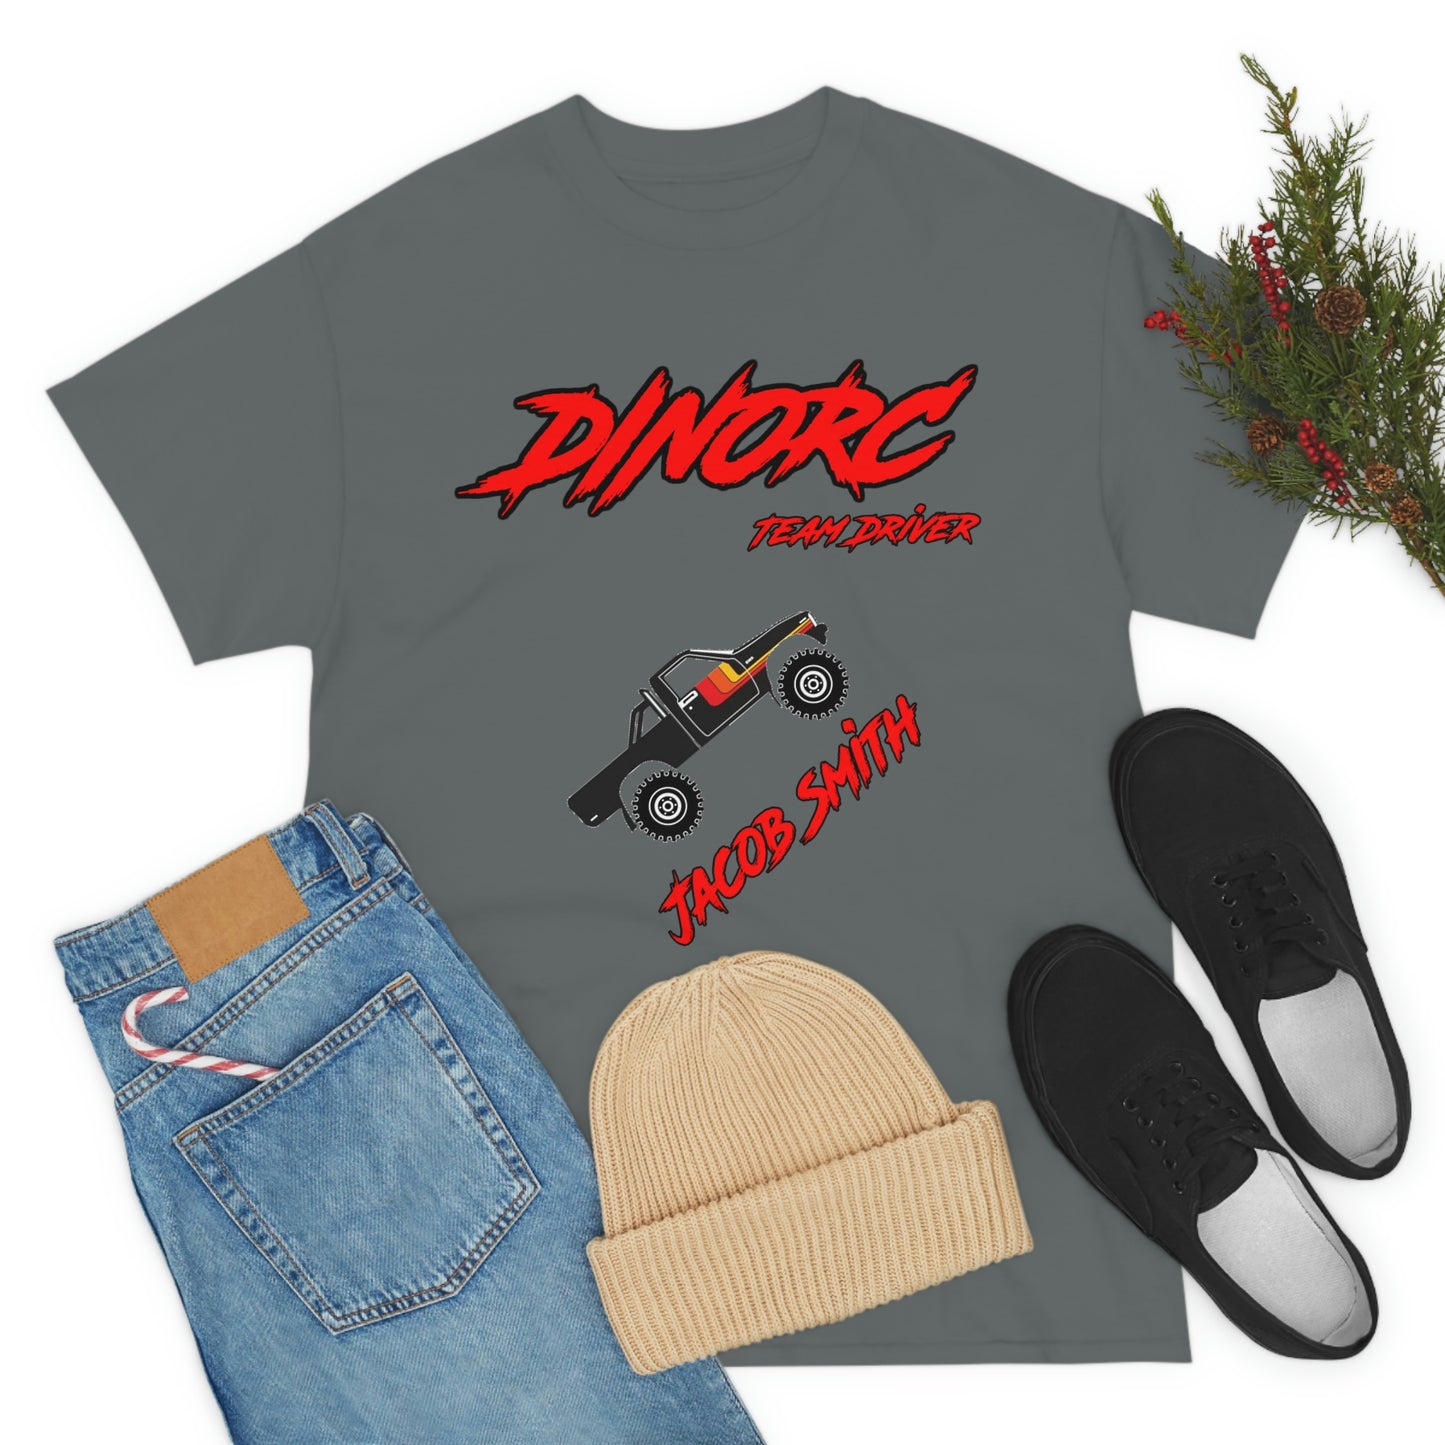 Team Driver Jacob Smith truck logo Front and Back DinoRc Logo T-Shirt S-5x 5 colors